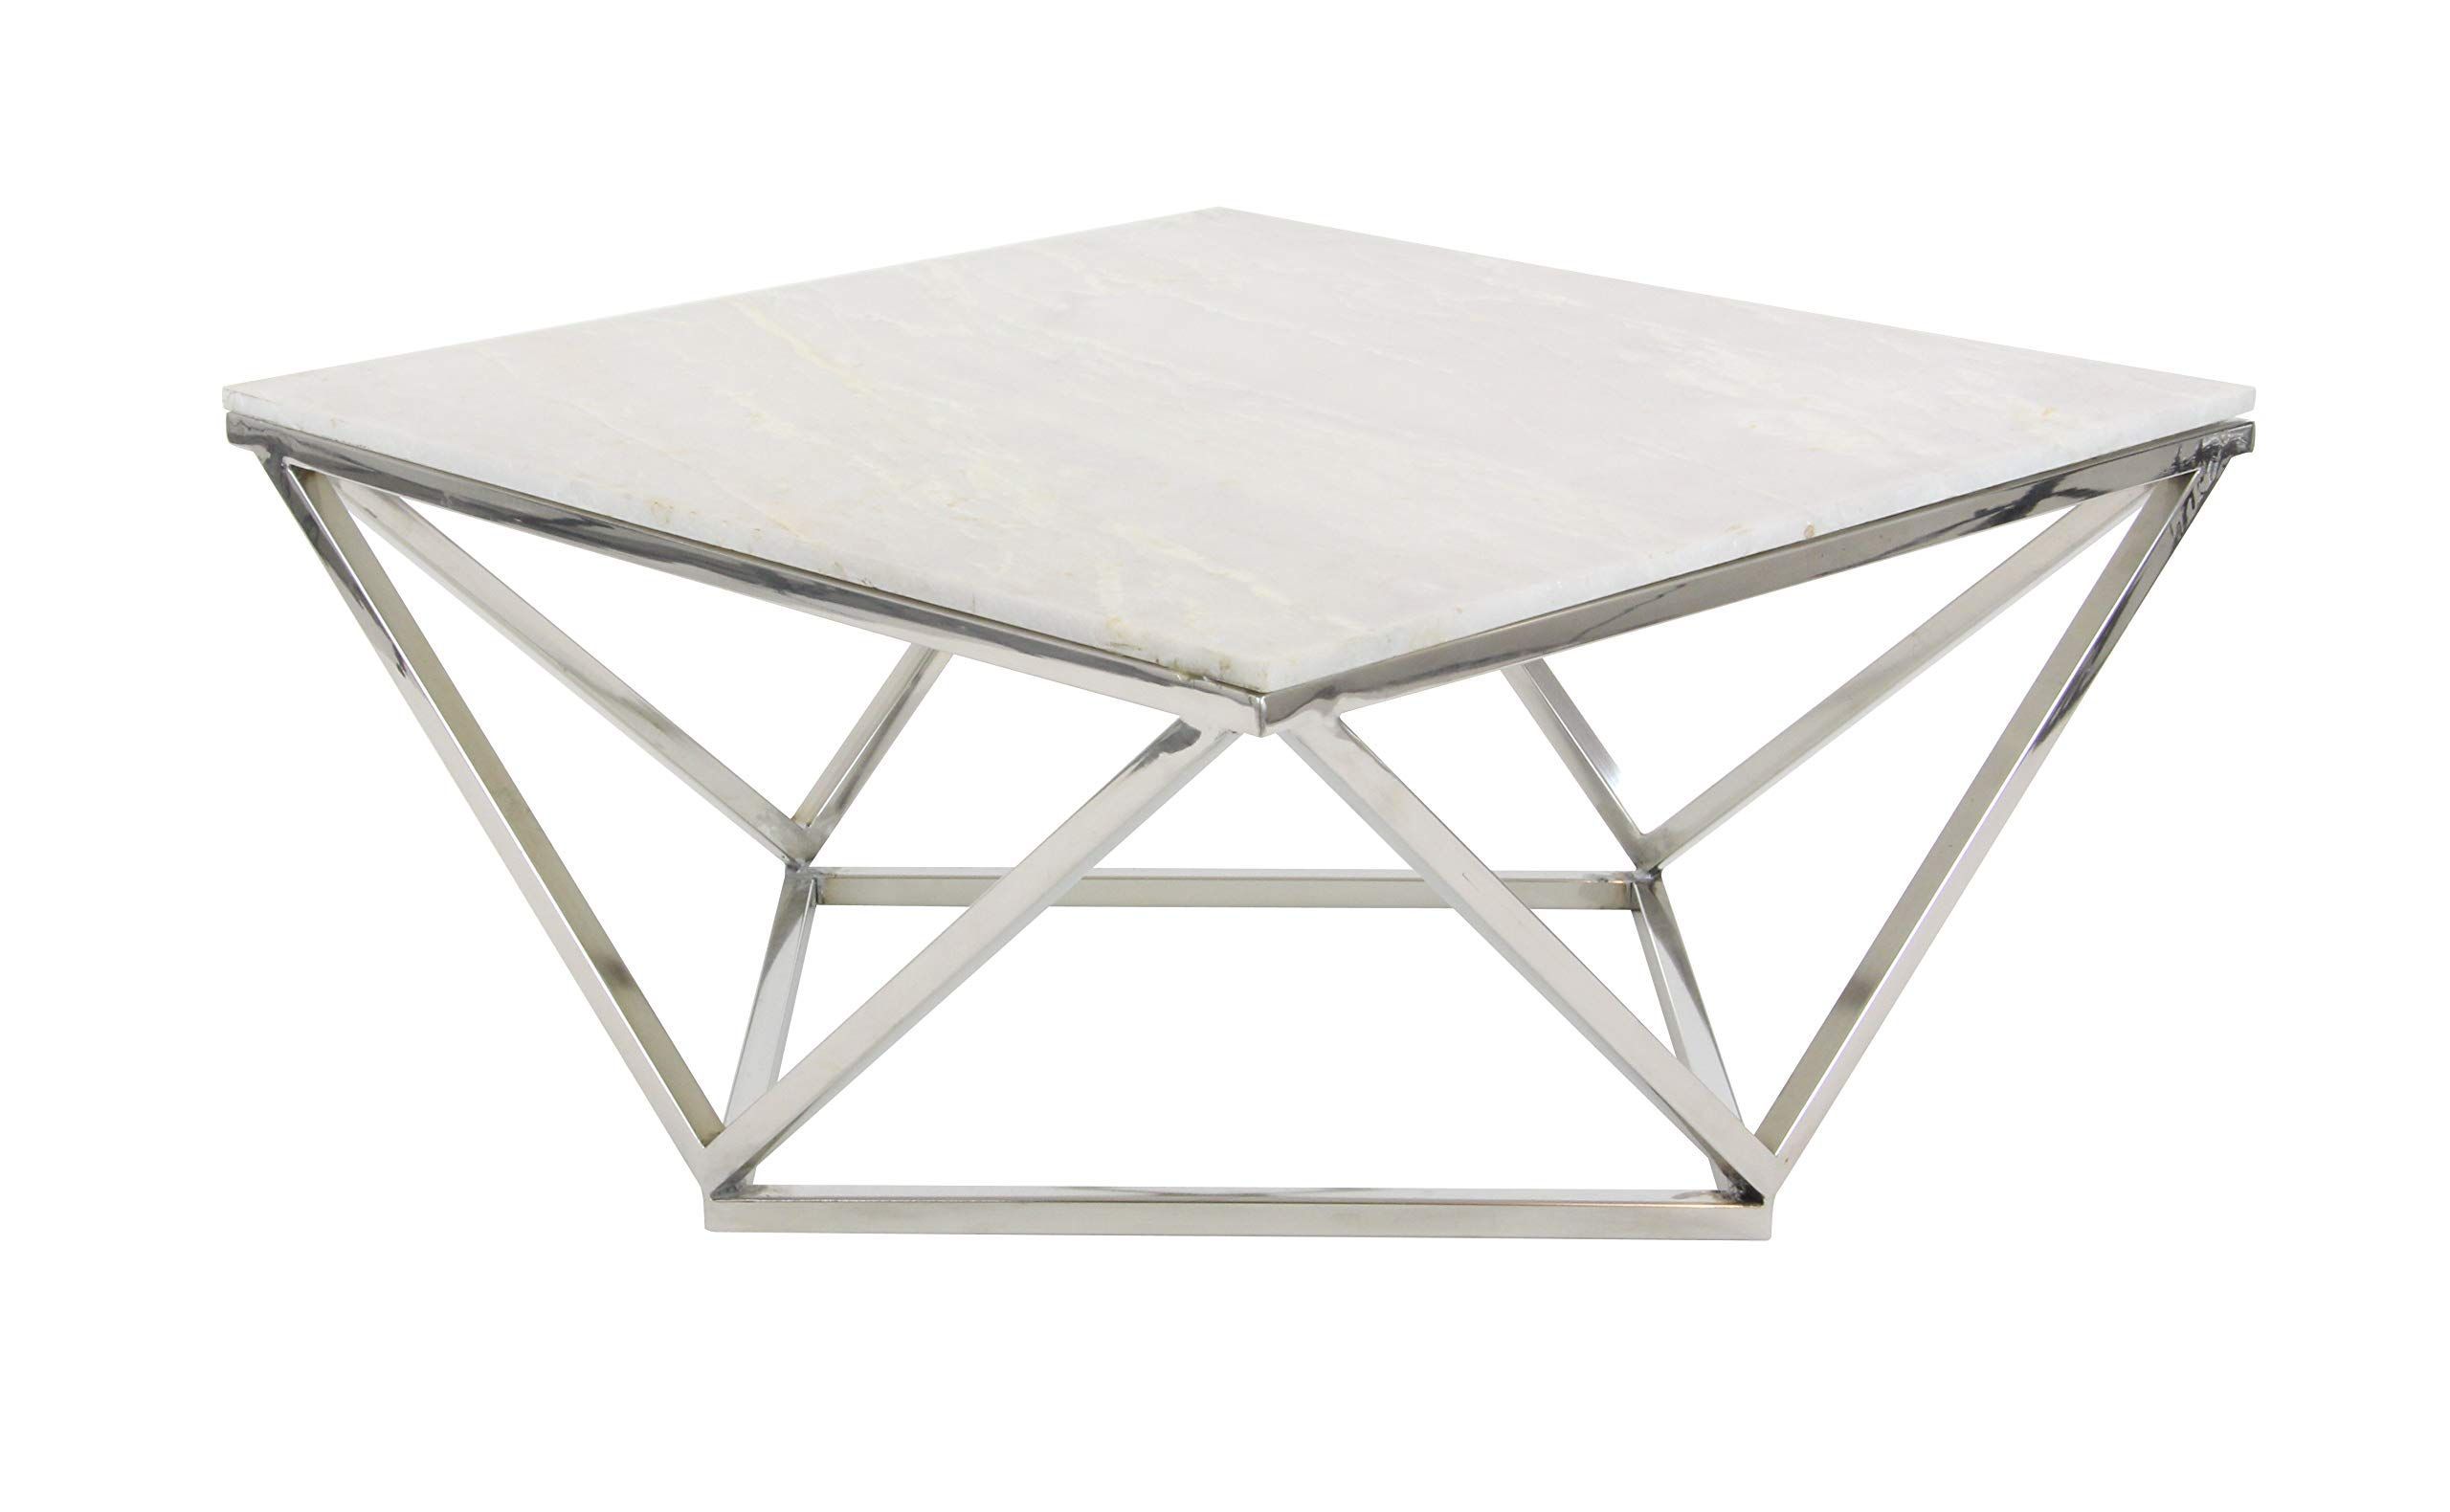 Deco 79 Square White Marble Coffee Table Silver Stainless Inside White Geometric Coffee Tables (View 13 of 15)